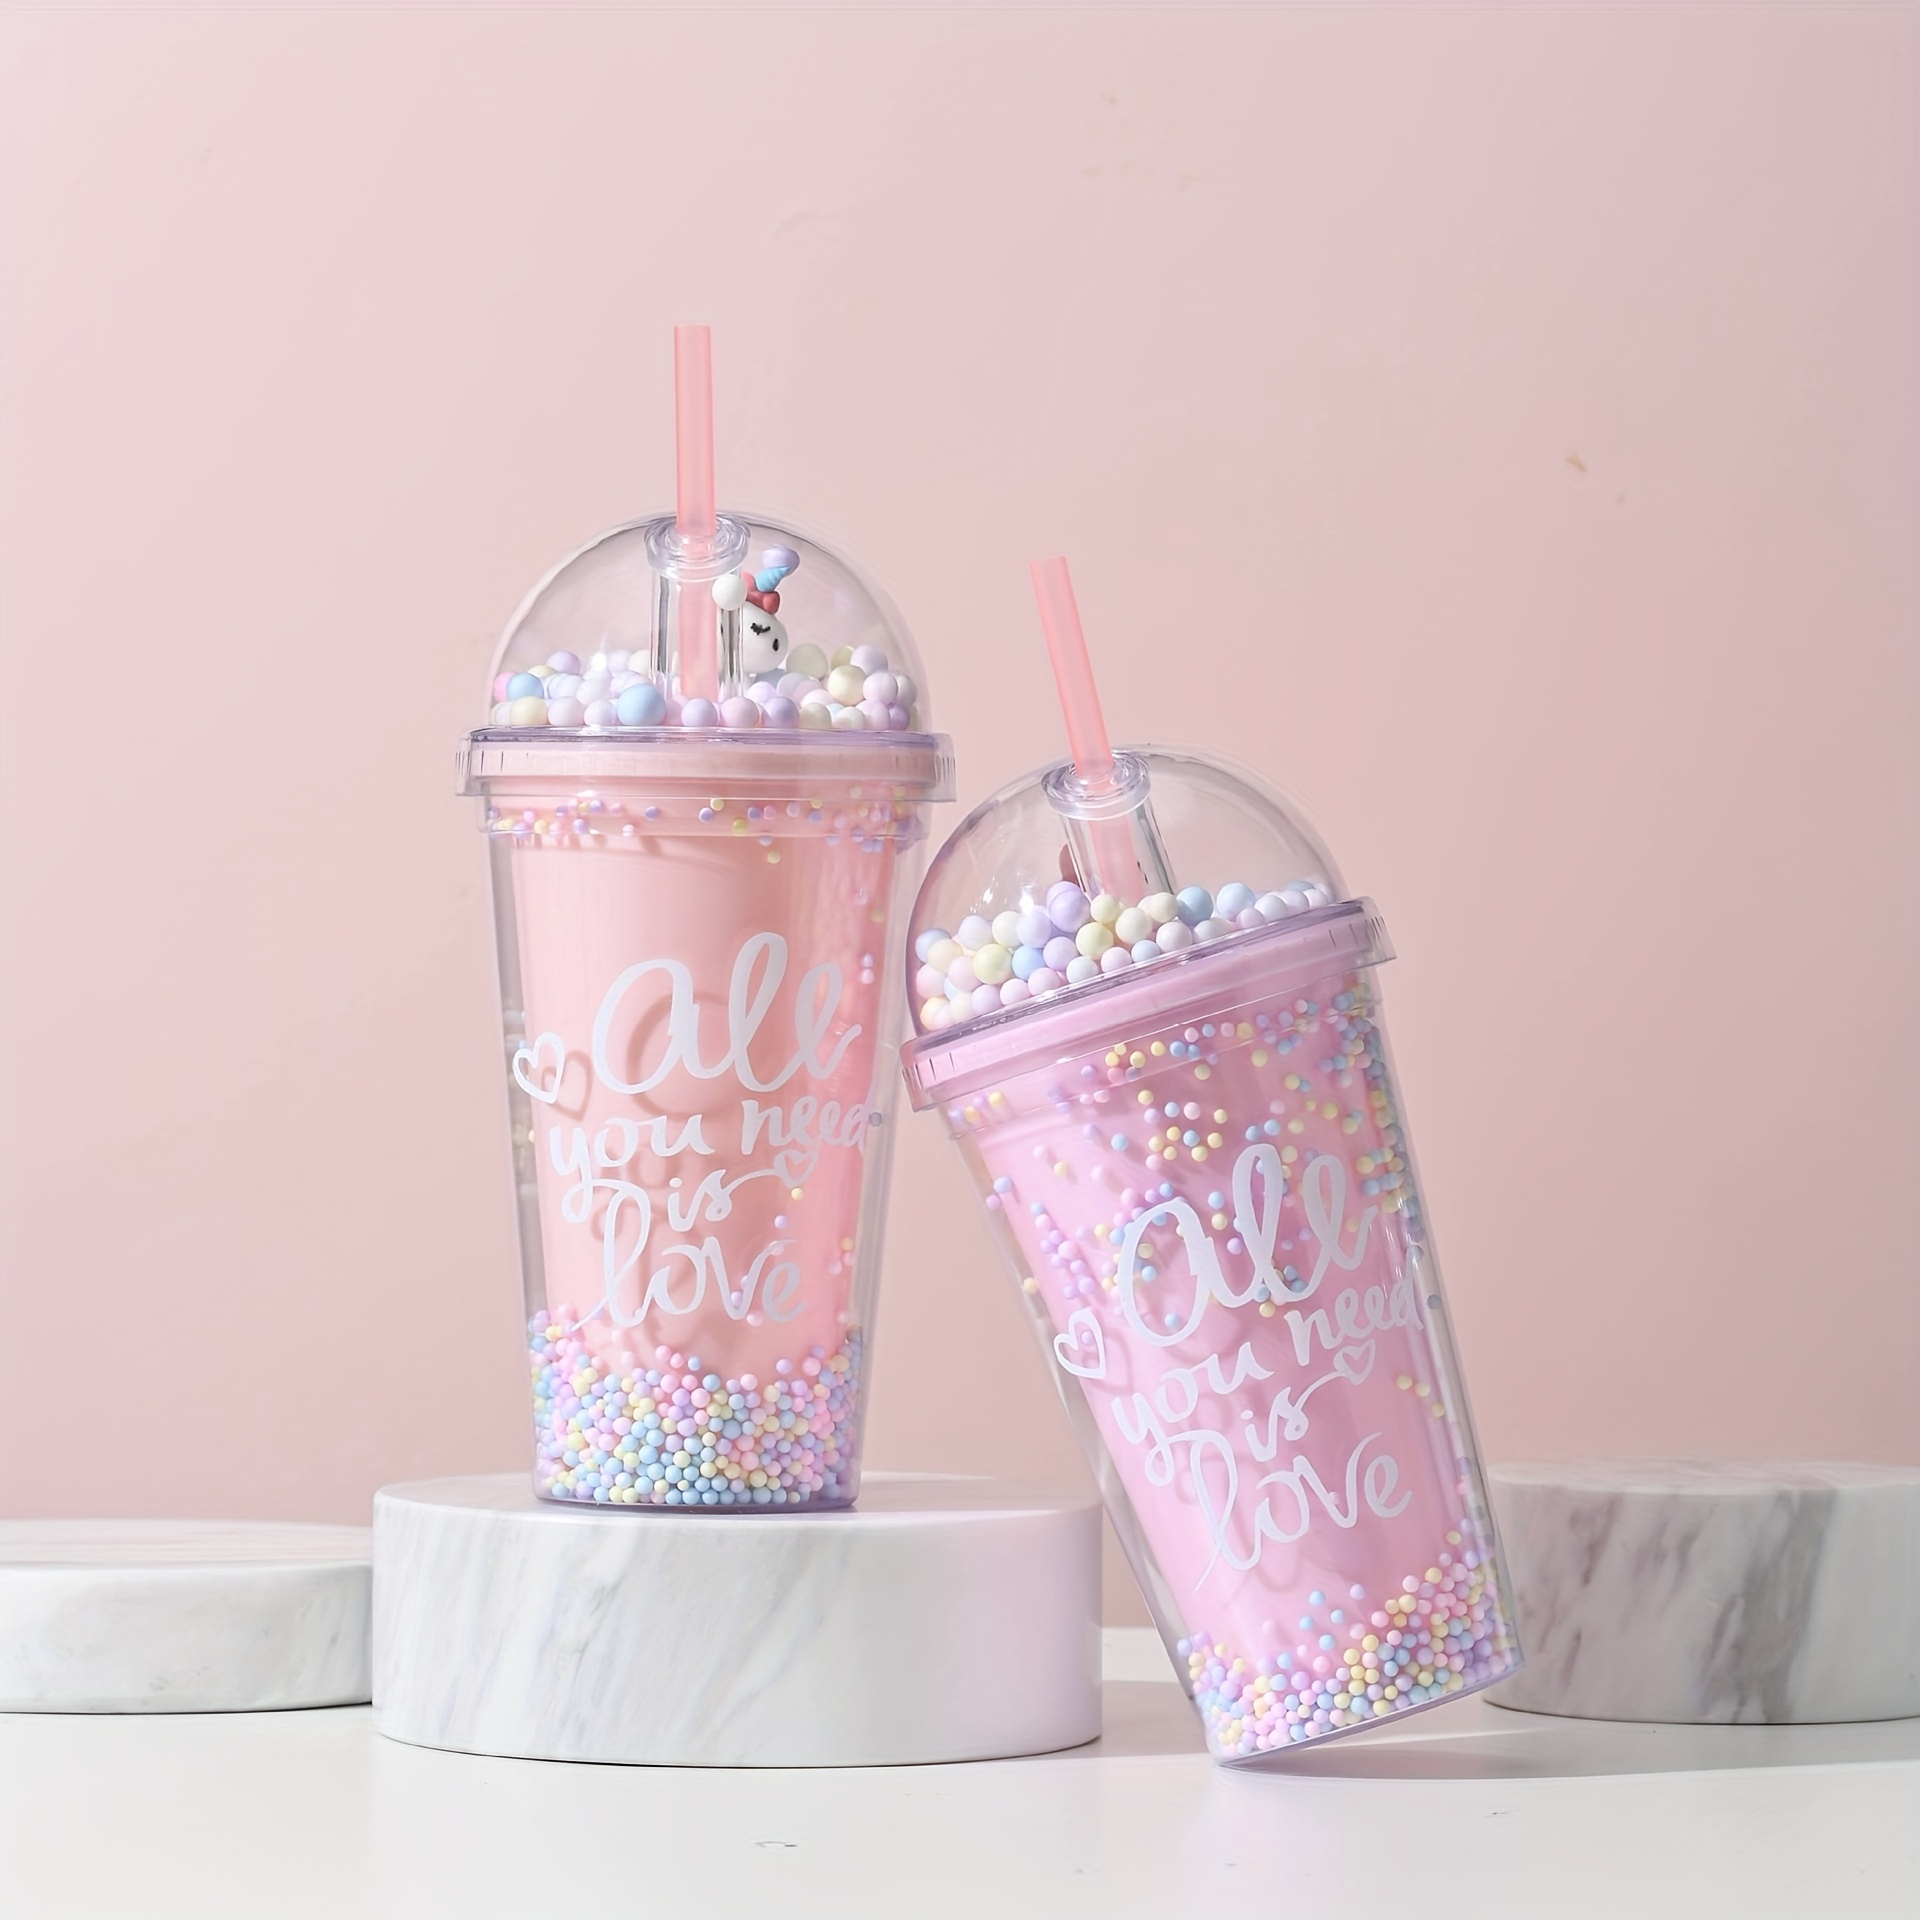 Shop Uwu Reusable Plastic Cup with Lid and Straw - Double Walled Insulated Cup with Crystal Dome lid; Cold Drink Tumbler with Straw; Reusable